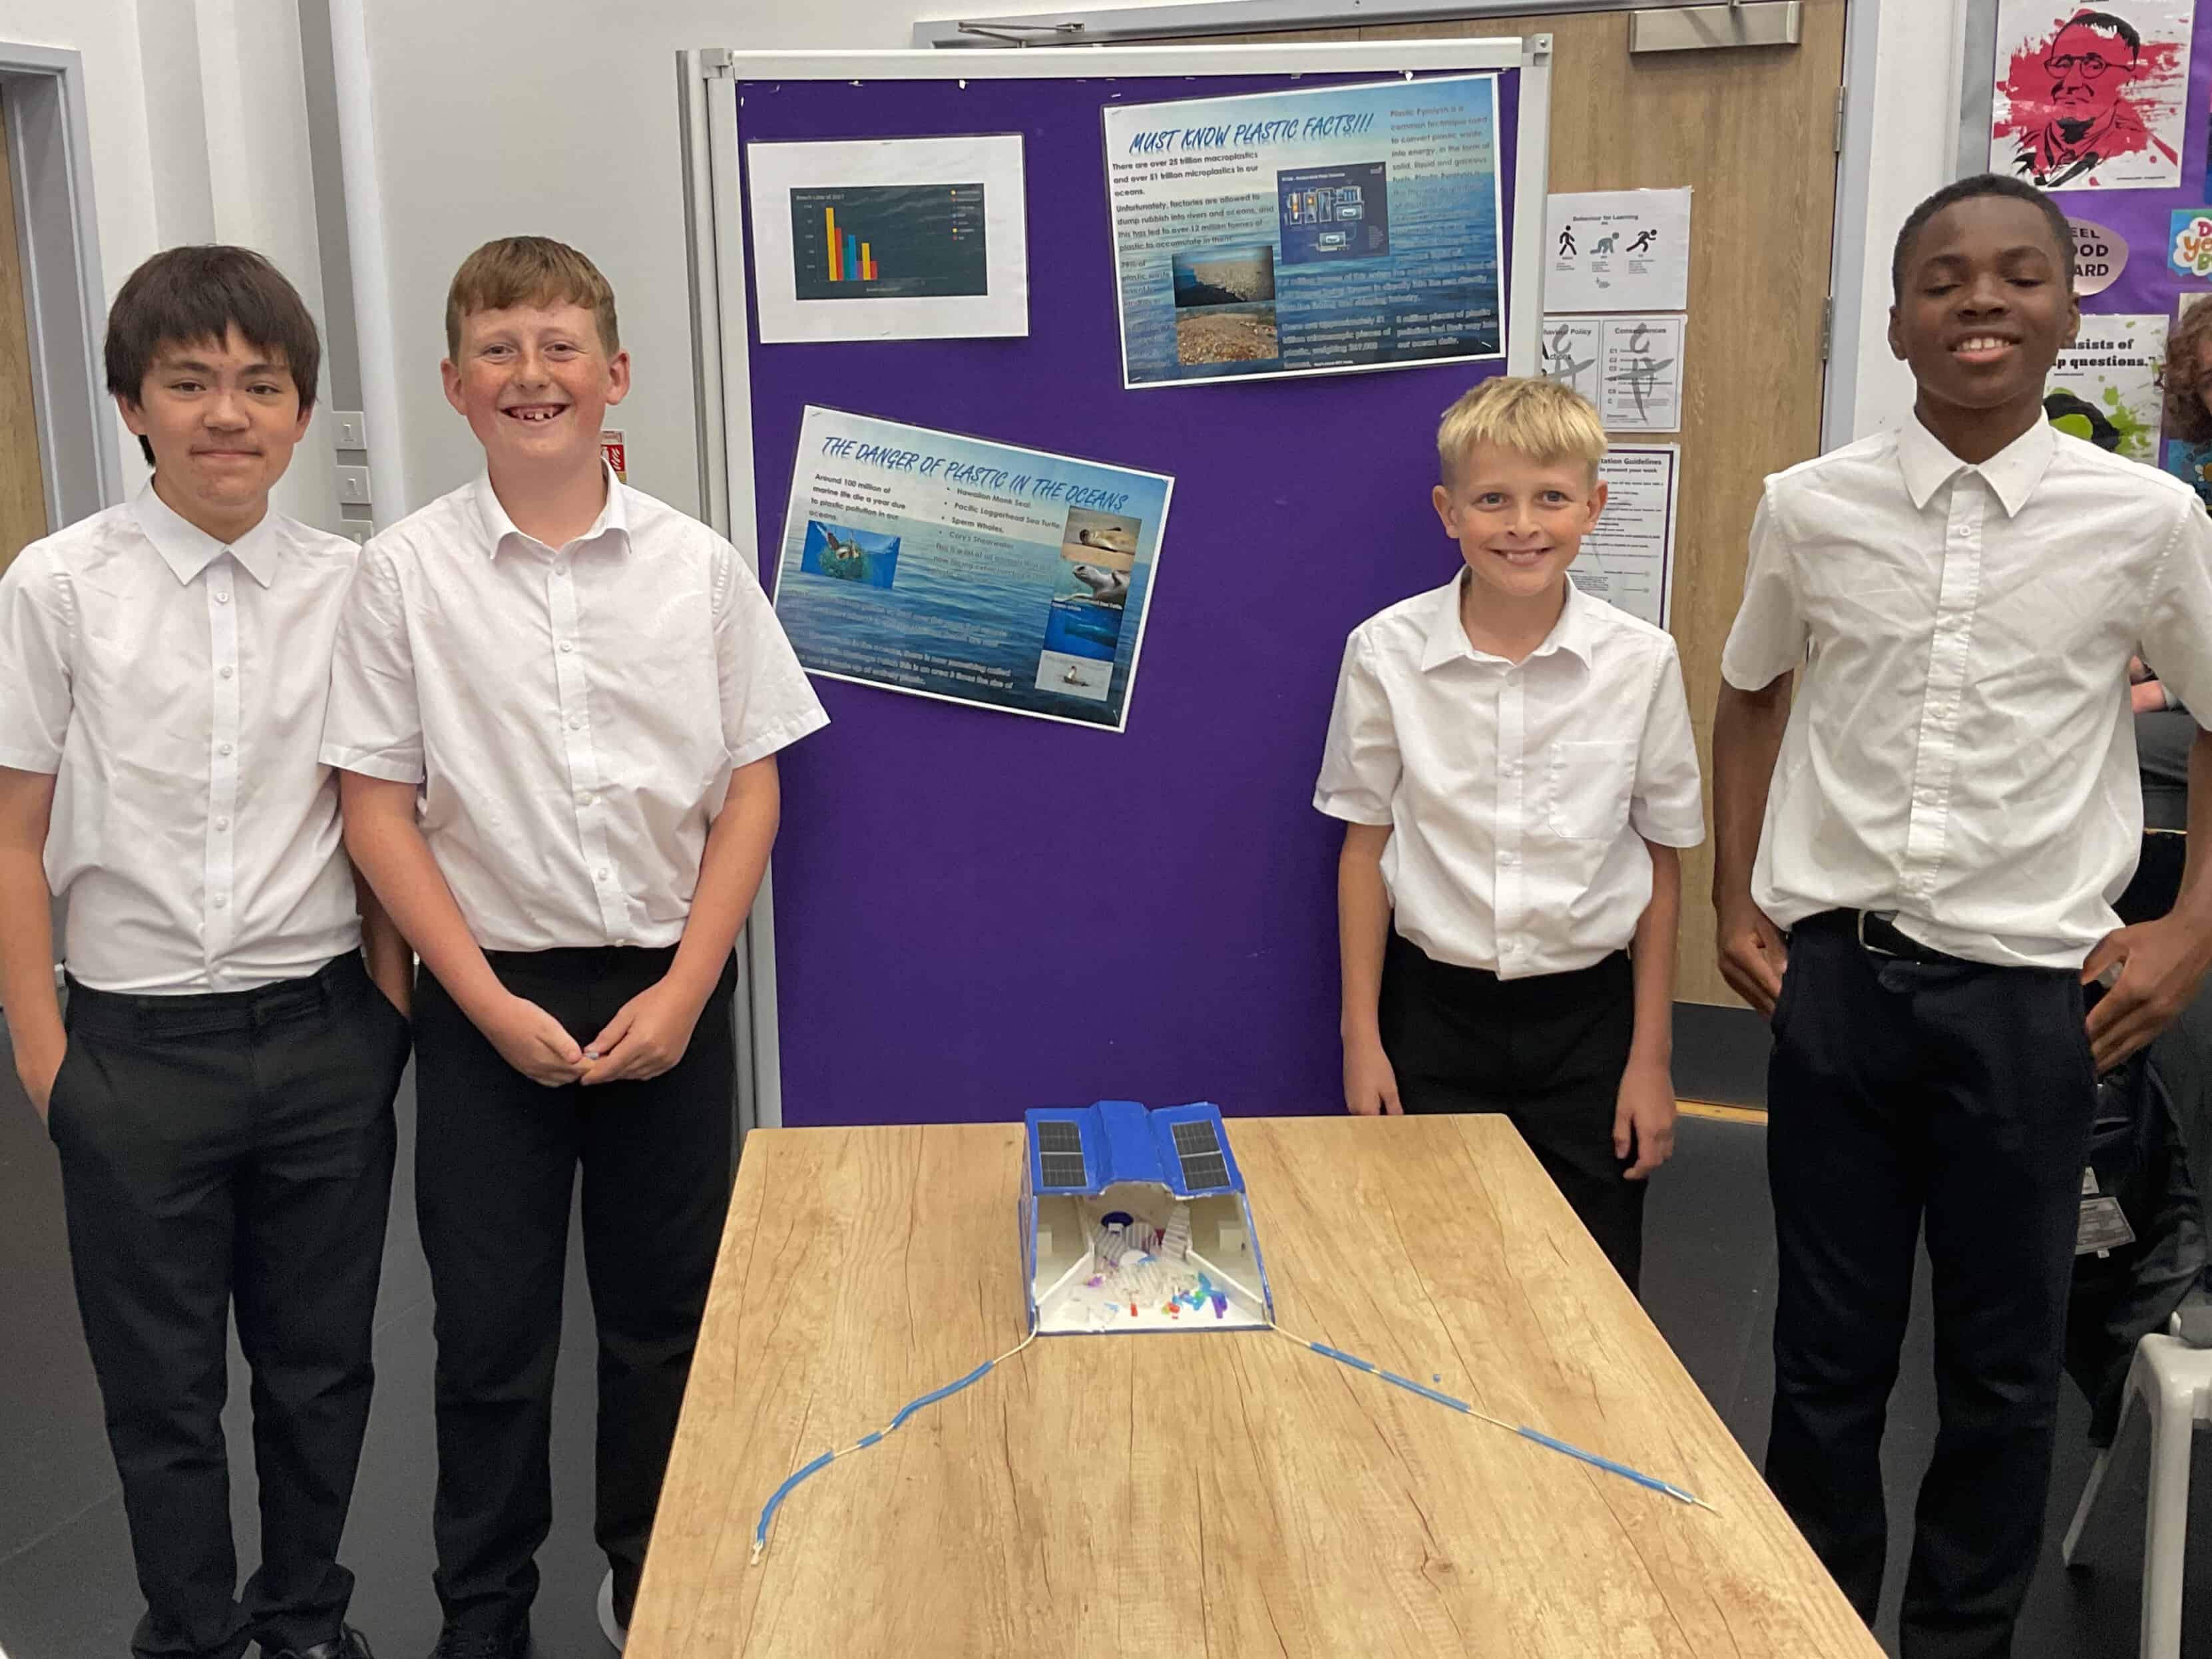 The four Cheadle Hulme High School students that make up Team AquaNet stand proudly next to their project at Laurus Cheadle Hulme.